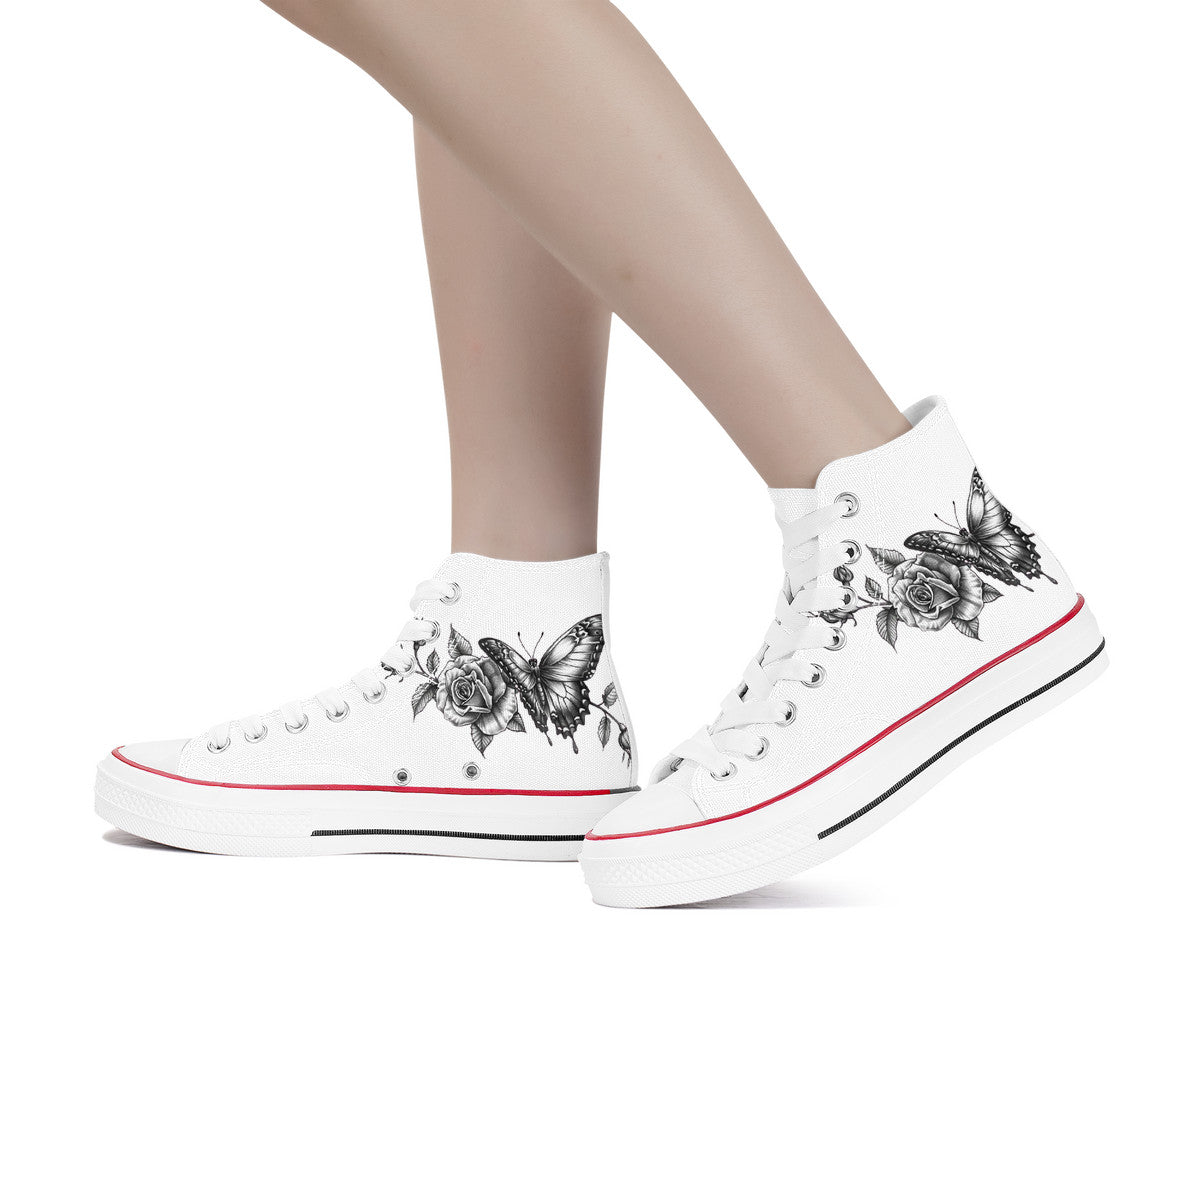 High Top Canvas Shoes - Tattoo butterfly and Roses